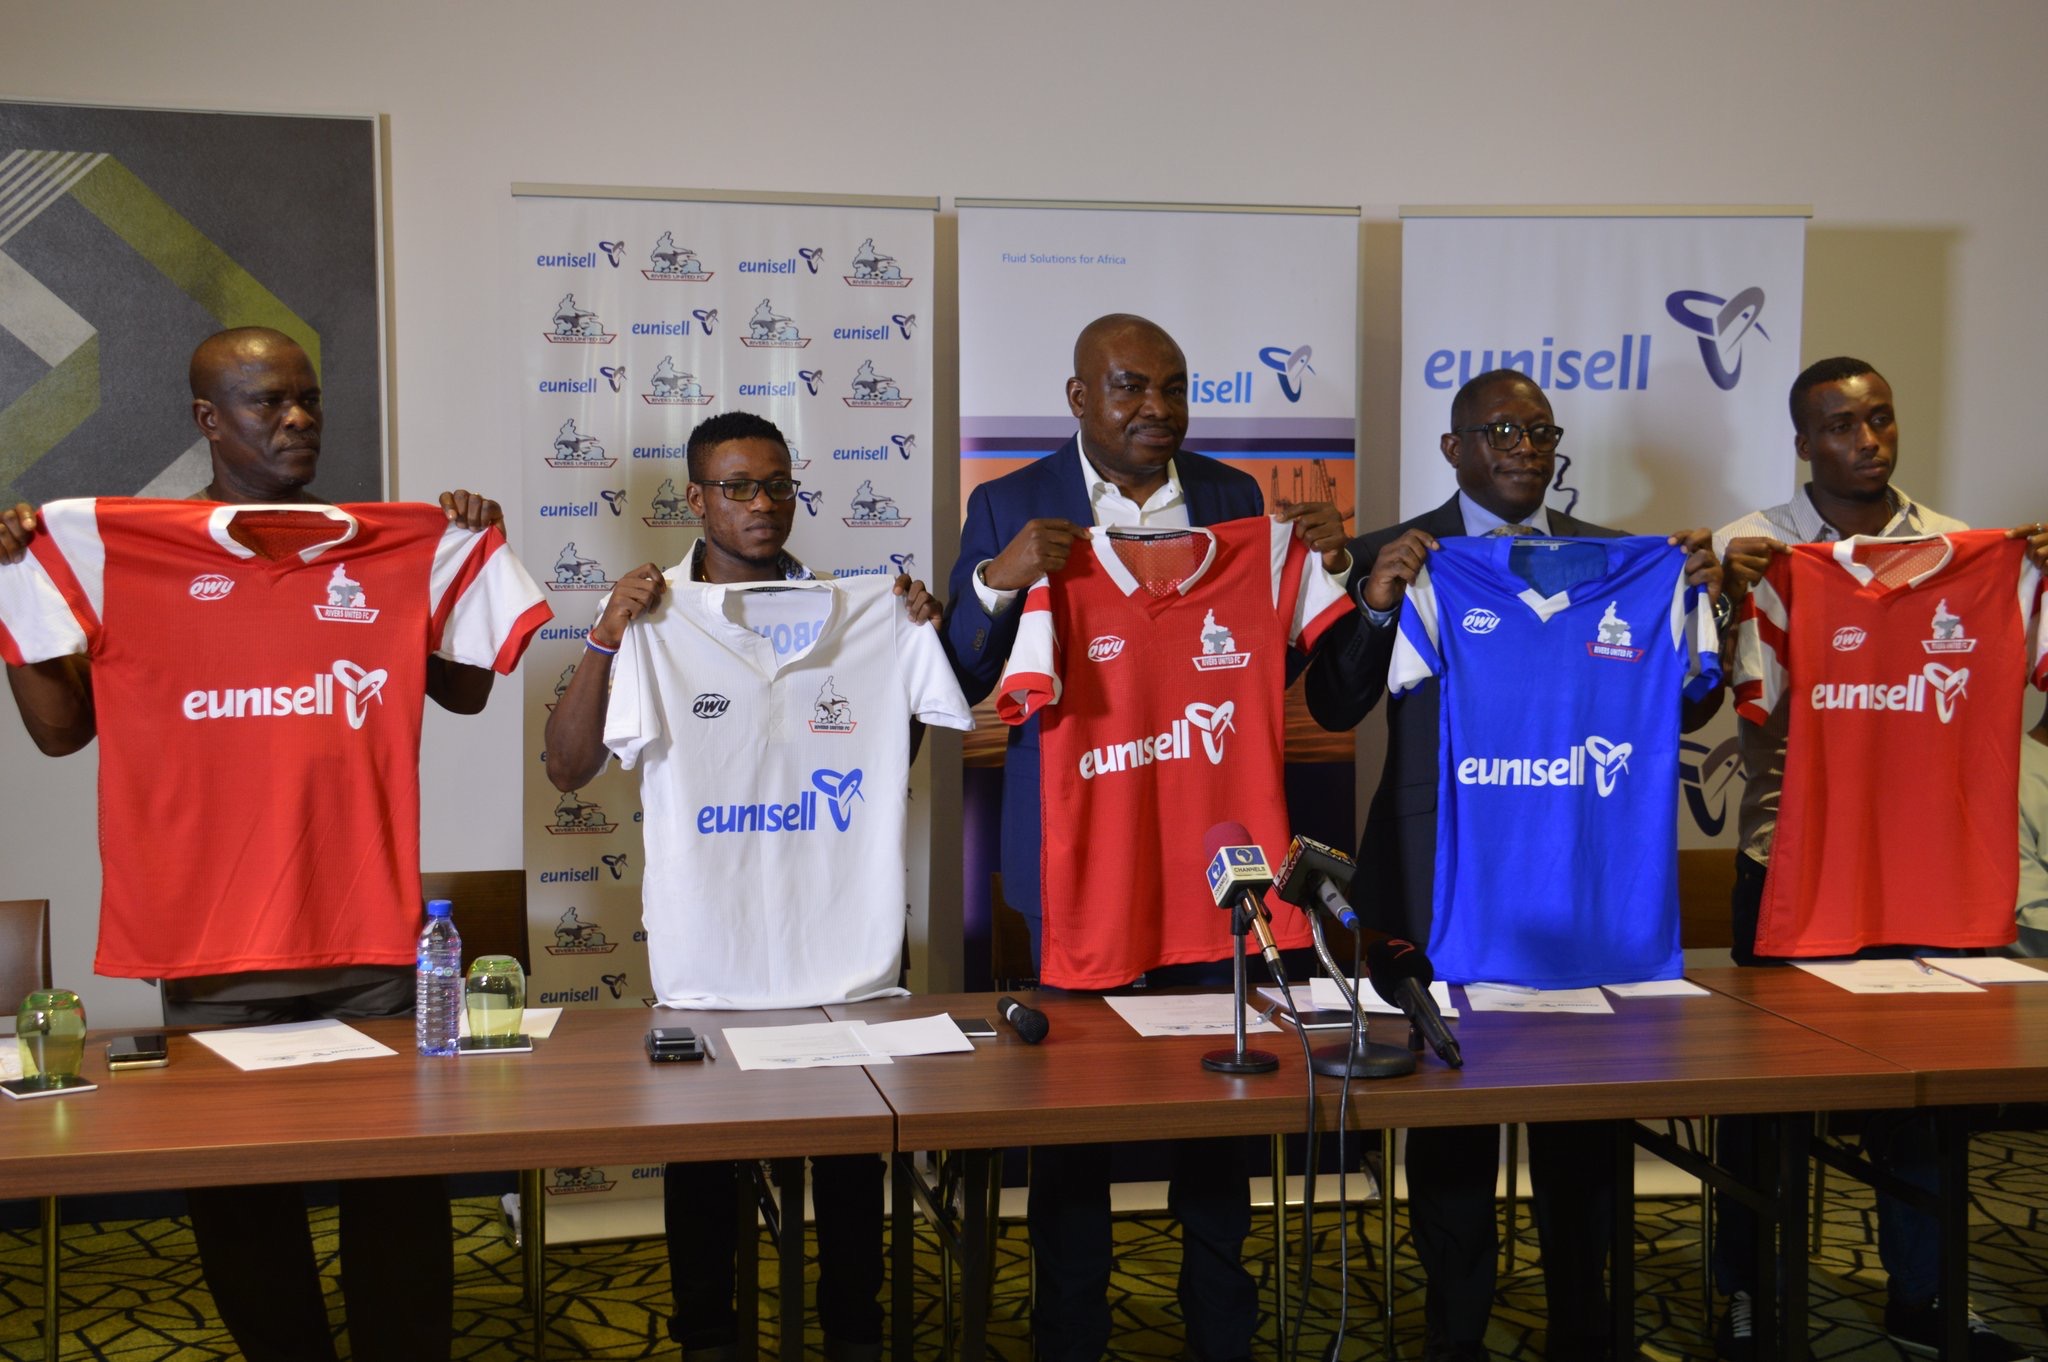 Eunisell, Rivers United Happy With Shirt Sponsorship Deal Renewal; Sponsor Donates N10m